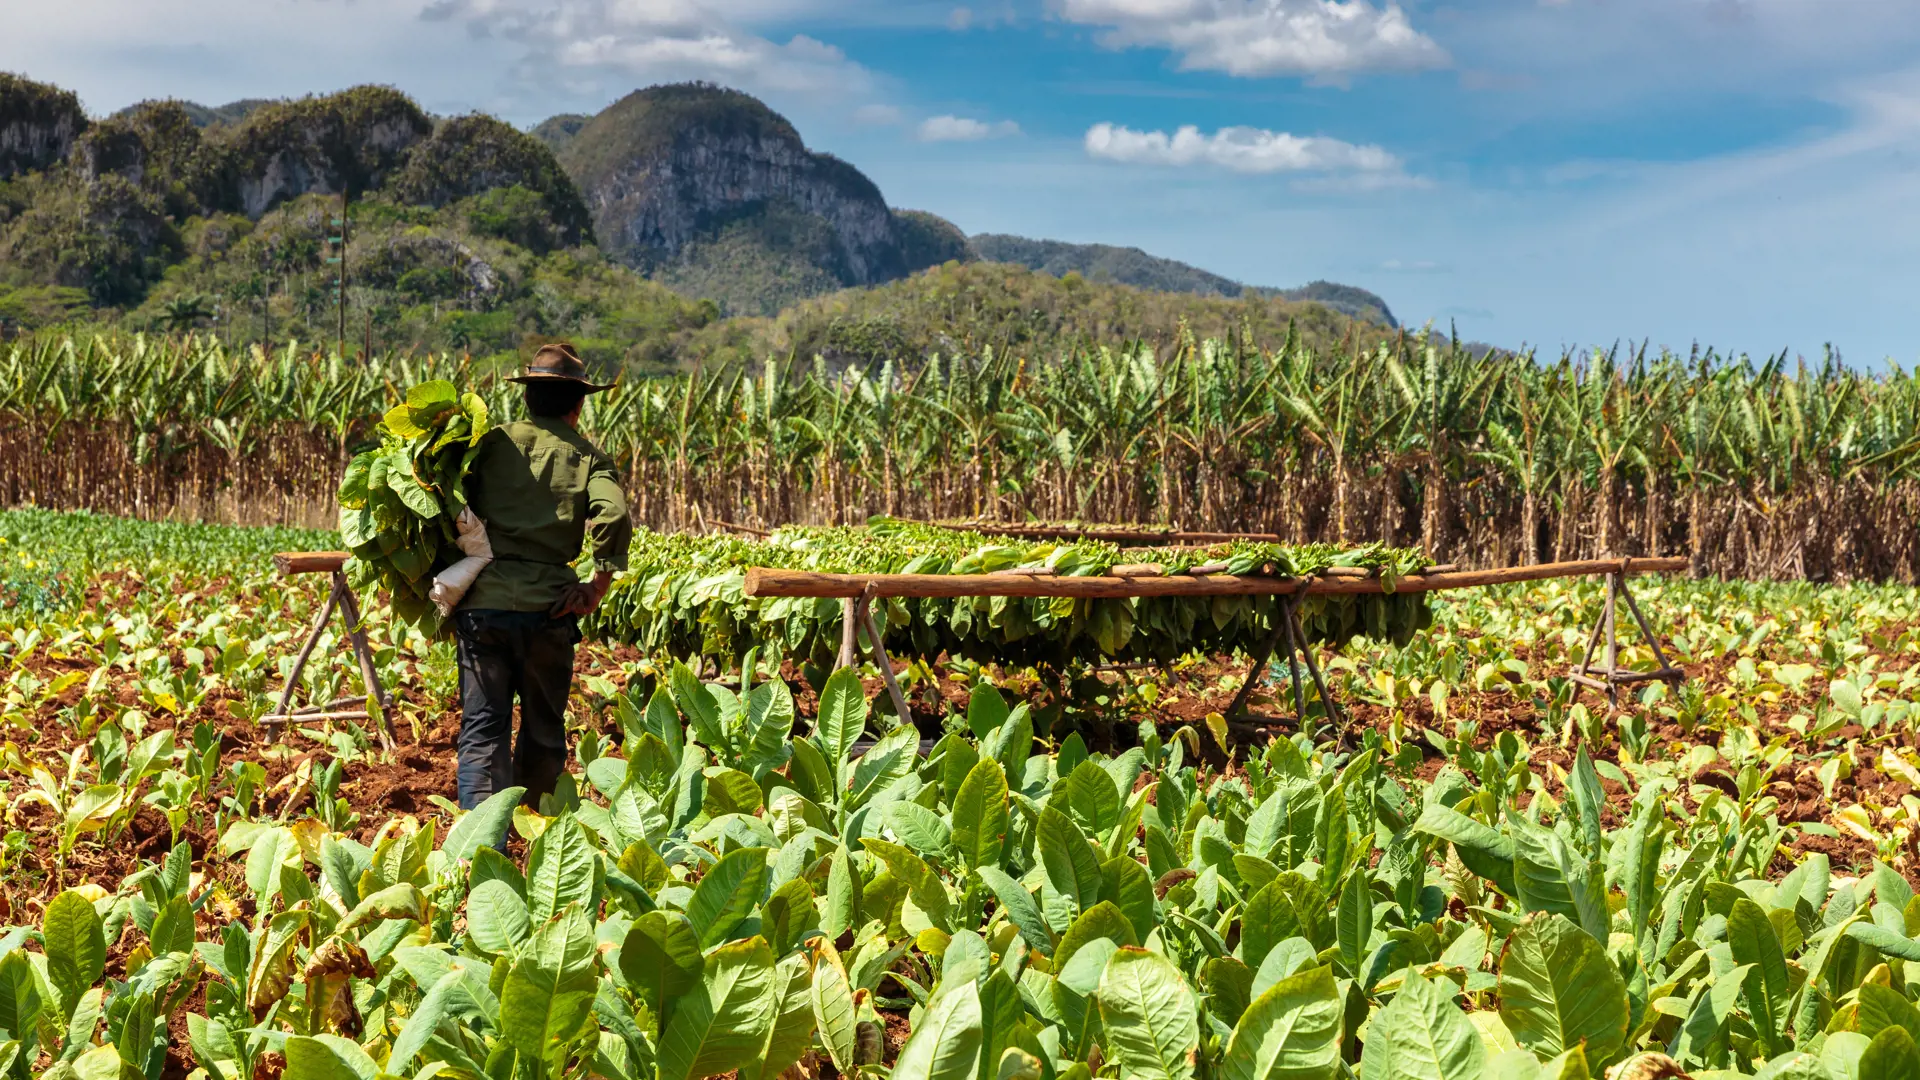 shutterstock_322728248 Tobacco plantation in the Vinales valley, north of Cuba.jpg